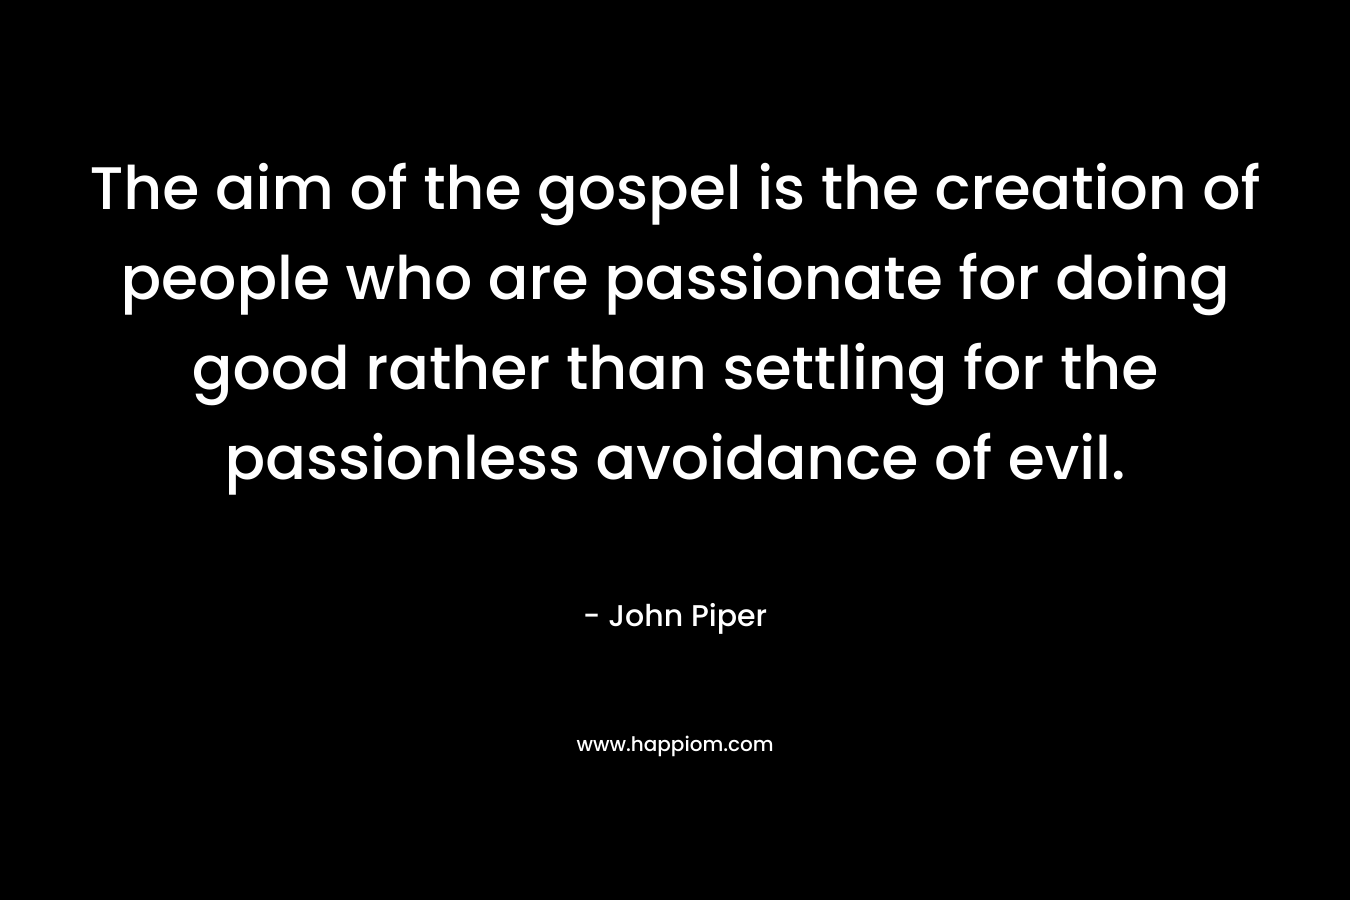 The aim of the gospel is the creation of people who are passionate for doing good rather than settling for the passionless avoidance of evil.